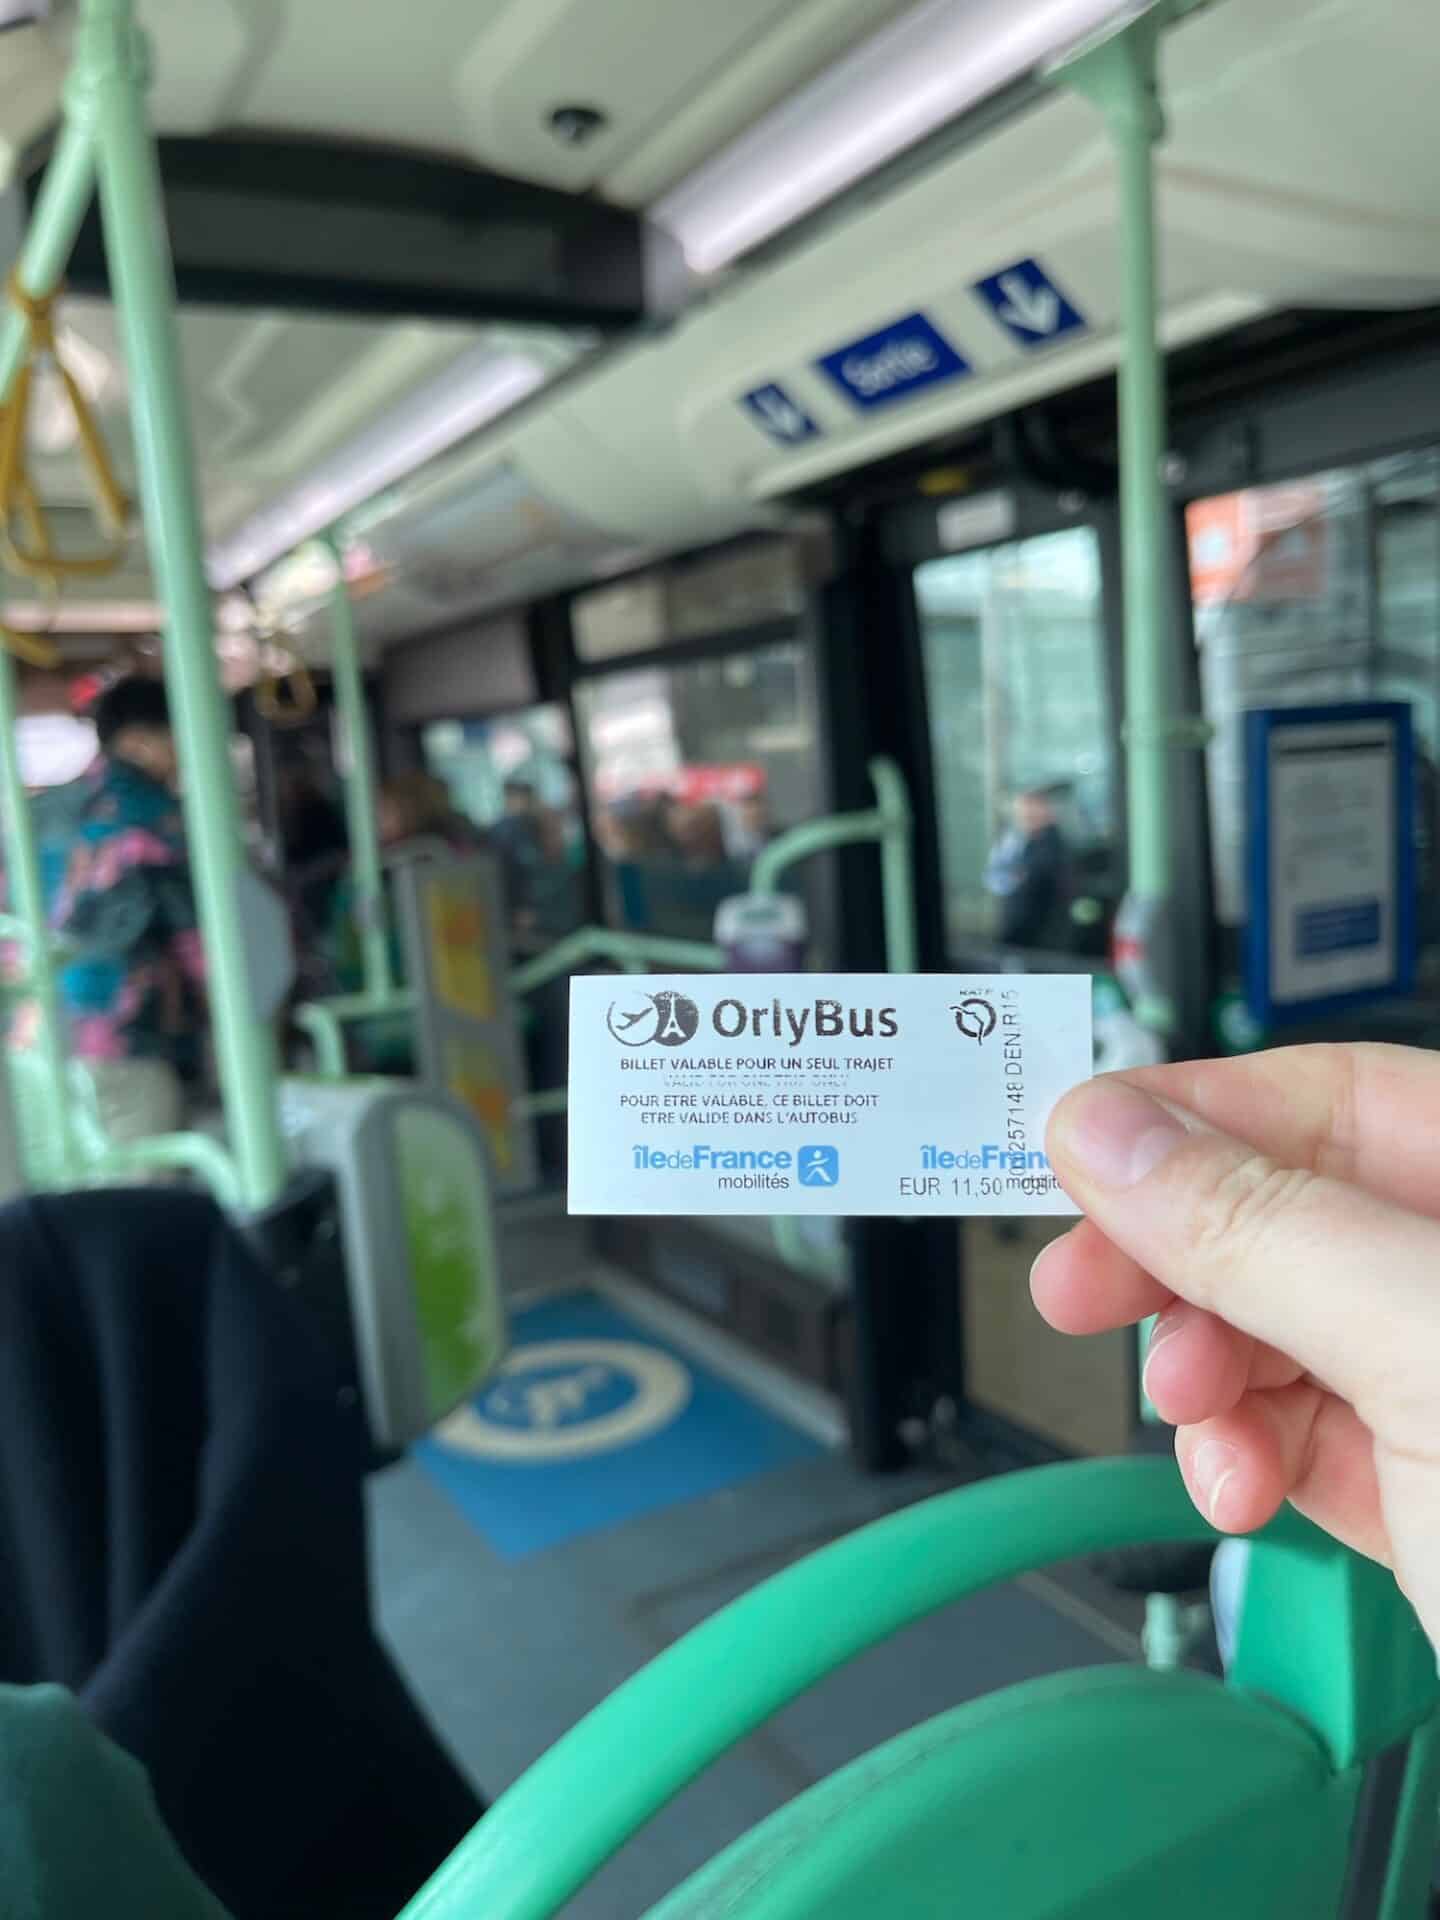 Picture of the bus ticket in Paris.